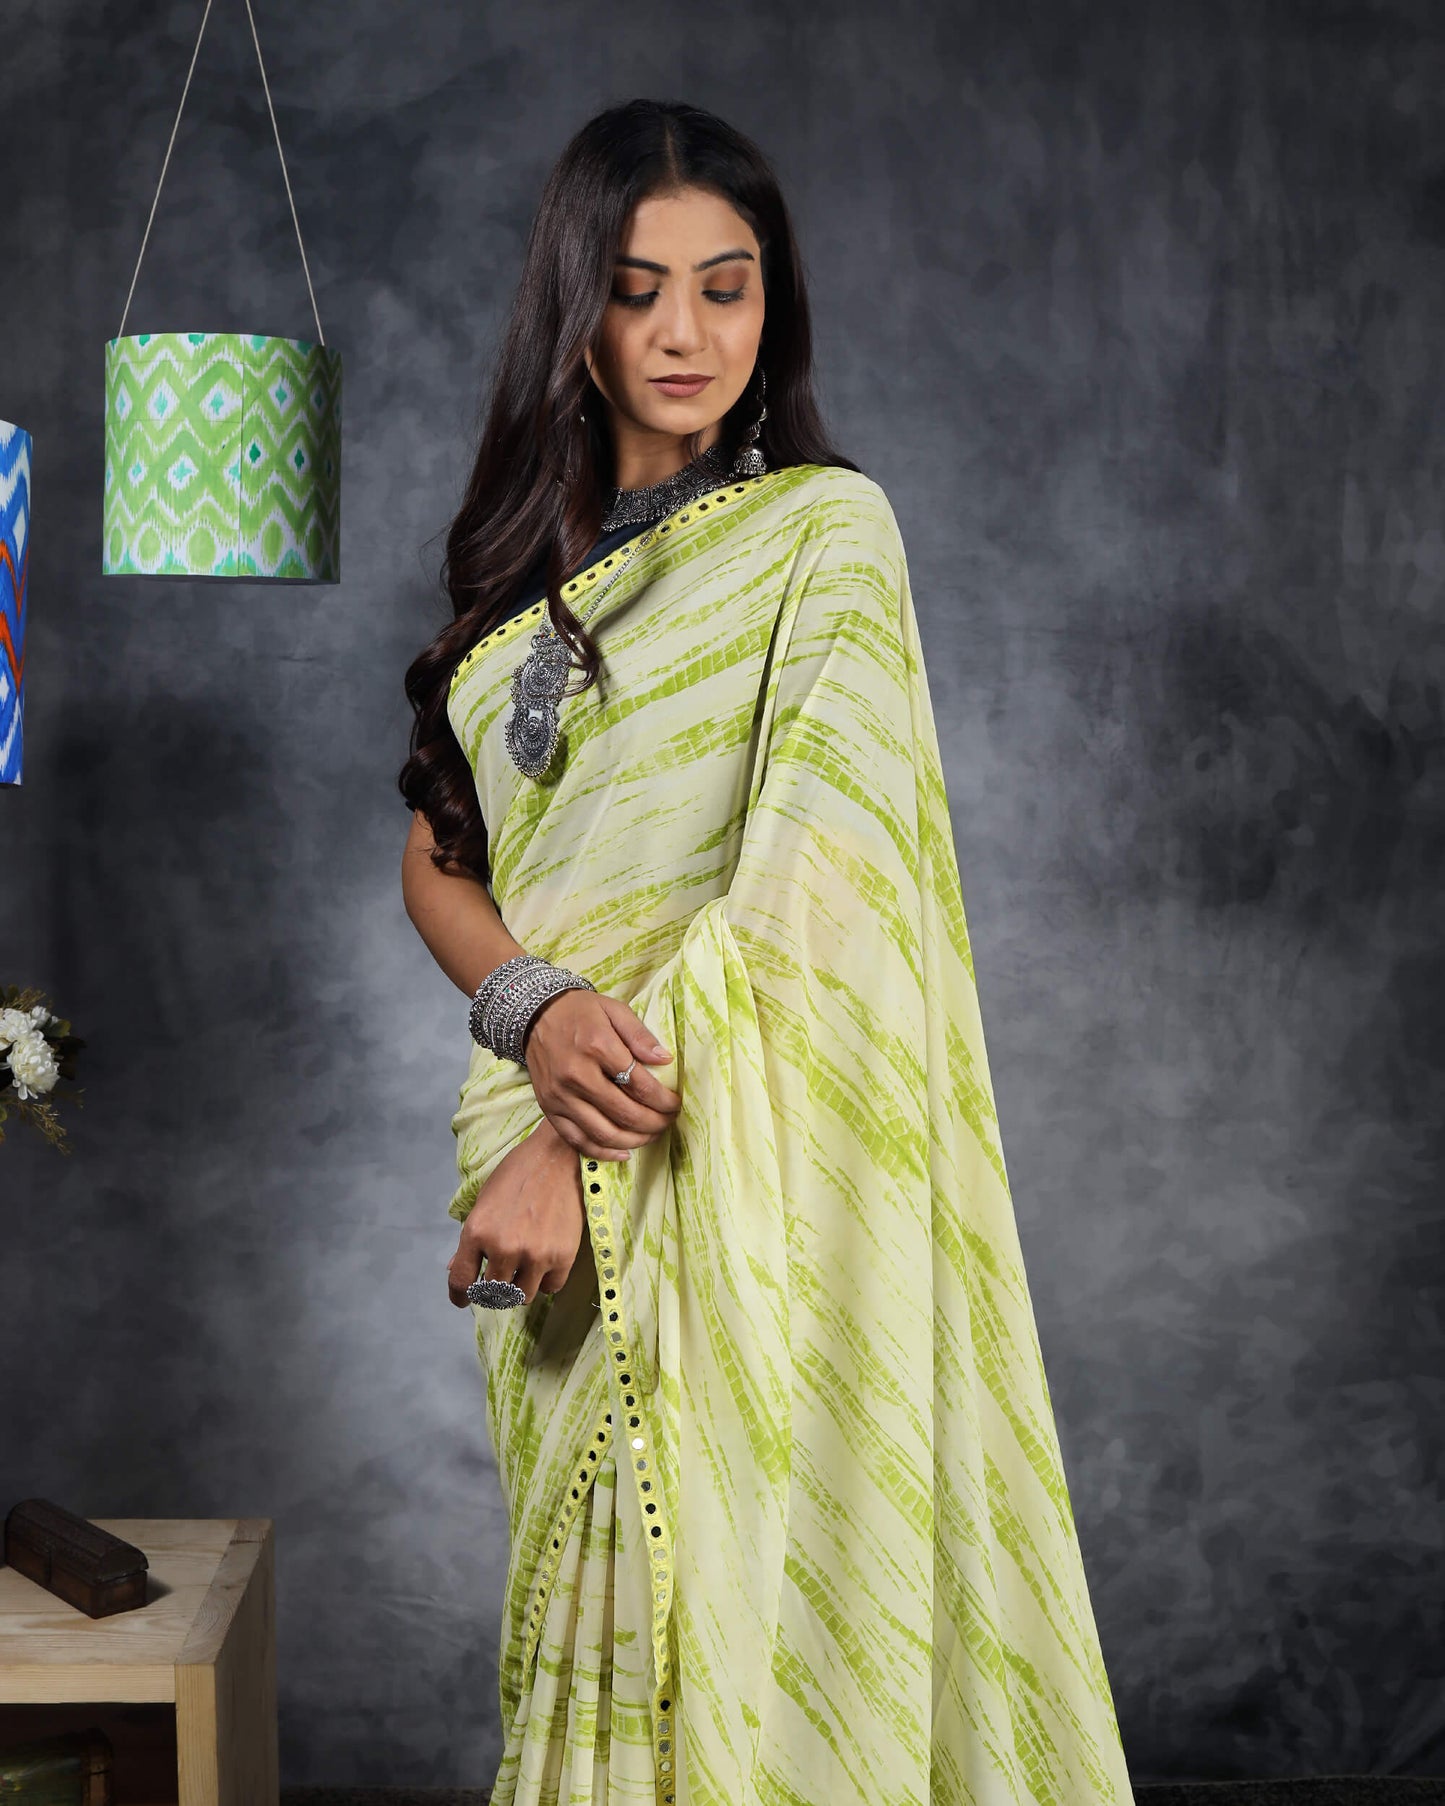 Lime Green And White Shibori Pattern Digital Print Georgette Saree With Mirror Work Lace Border